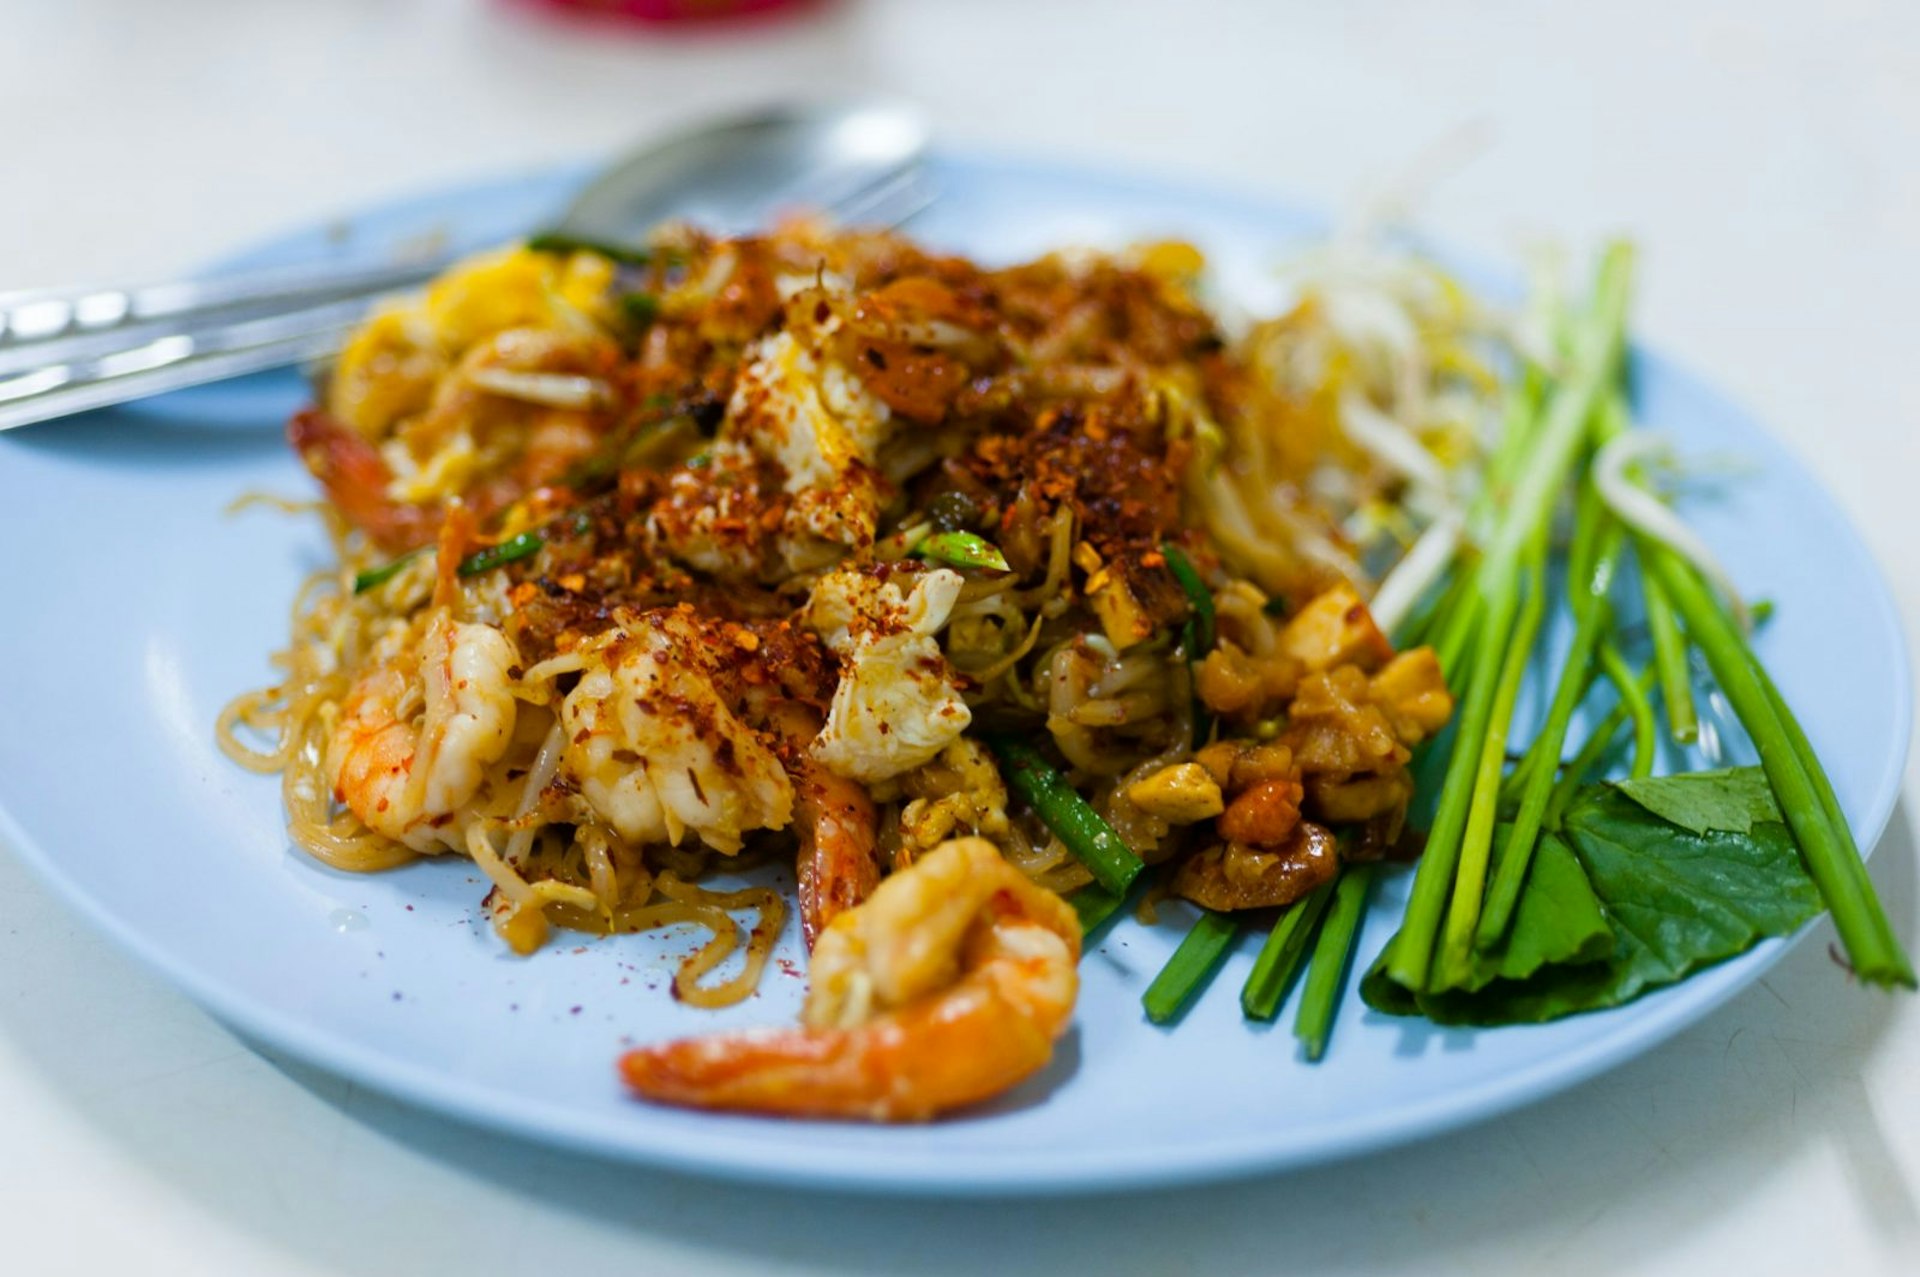 A plate of pat tai, stir-fried noodles with shrimp, bean sprouts, tofu, egg and seasonings from a restaurant in Bangkok, Thailand © Austin Bush / Lonely Planet